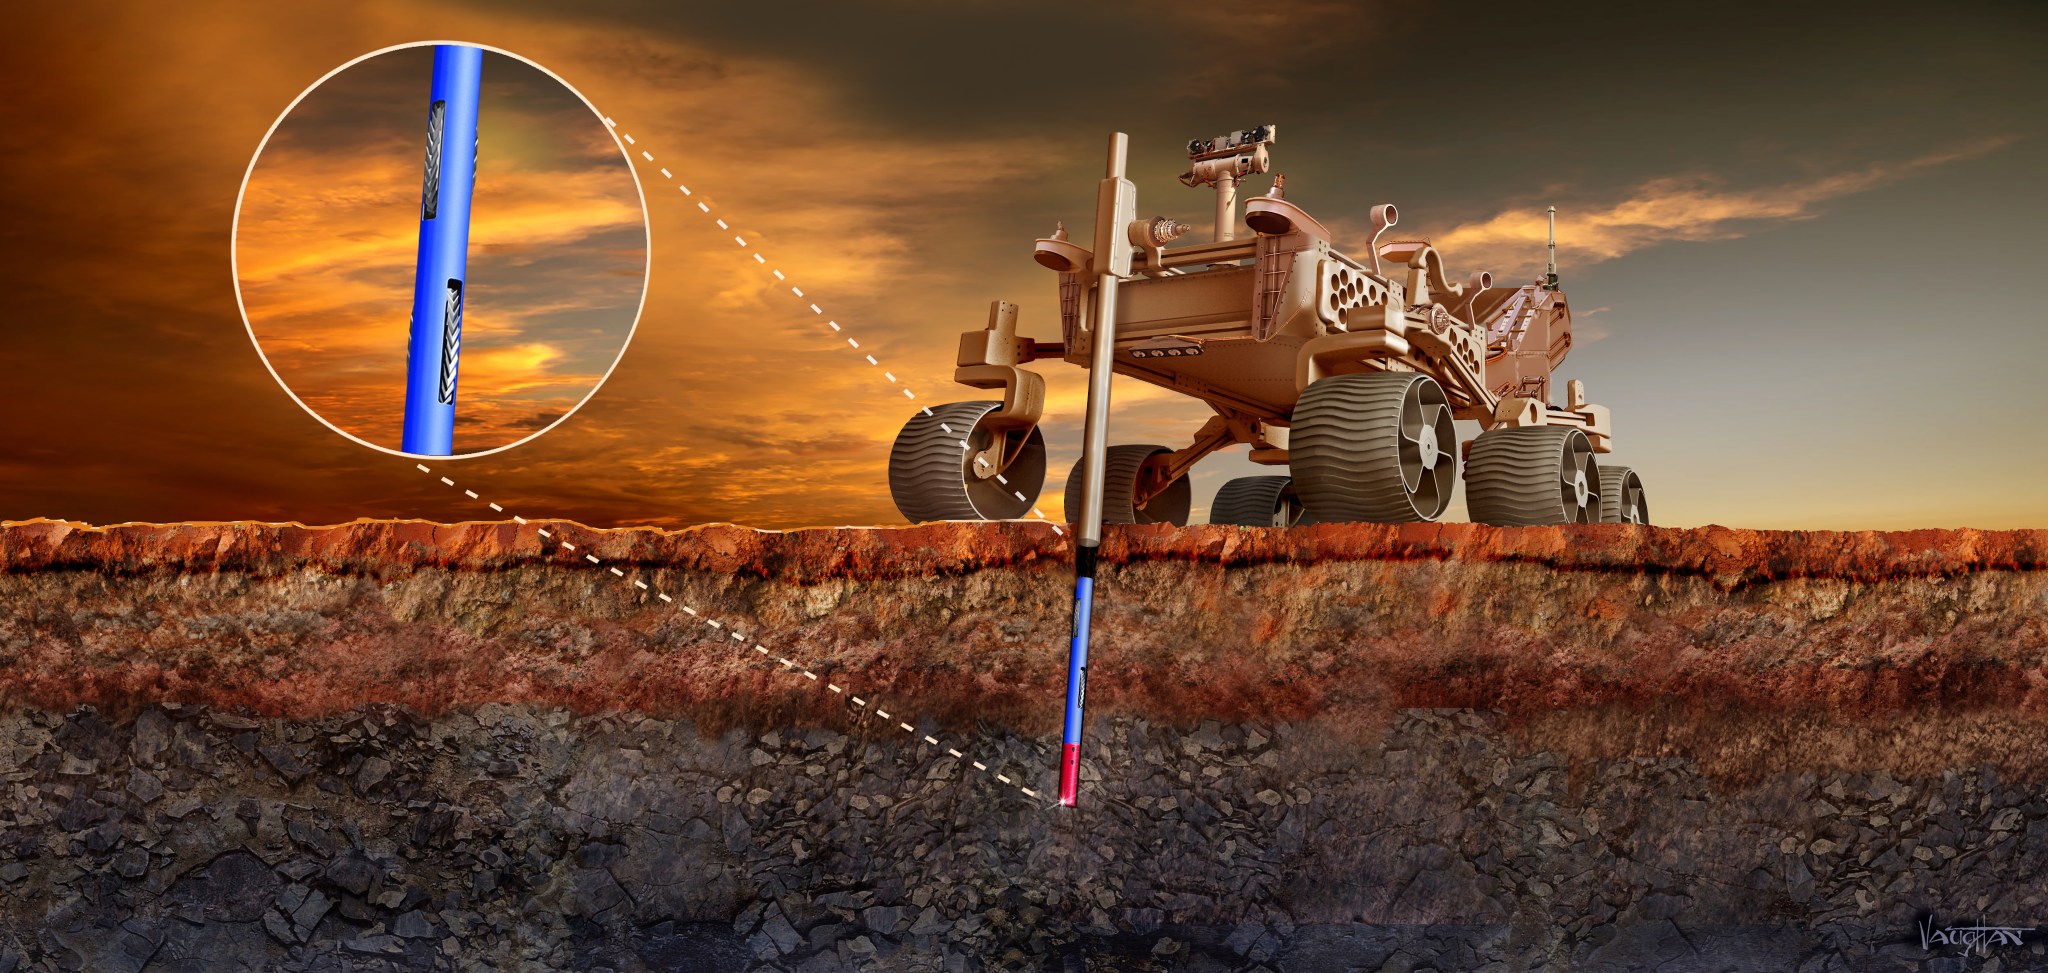 Rover deep drilling on martian surface.